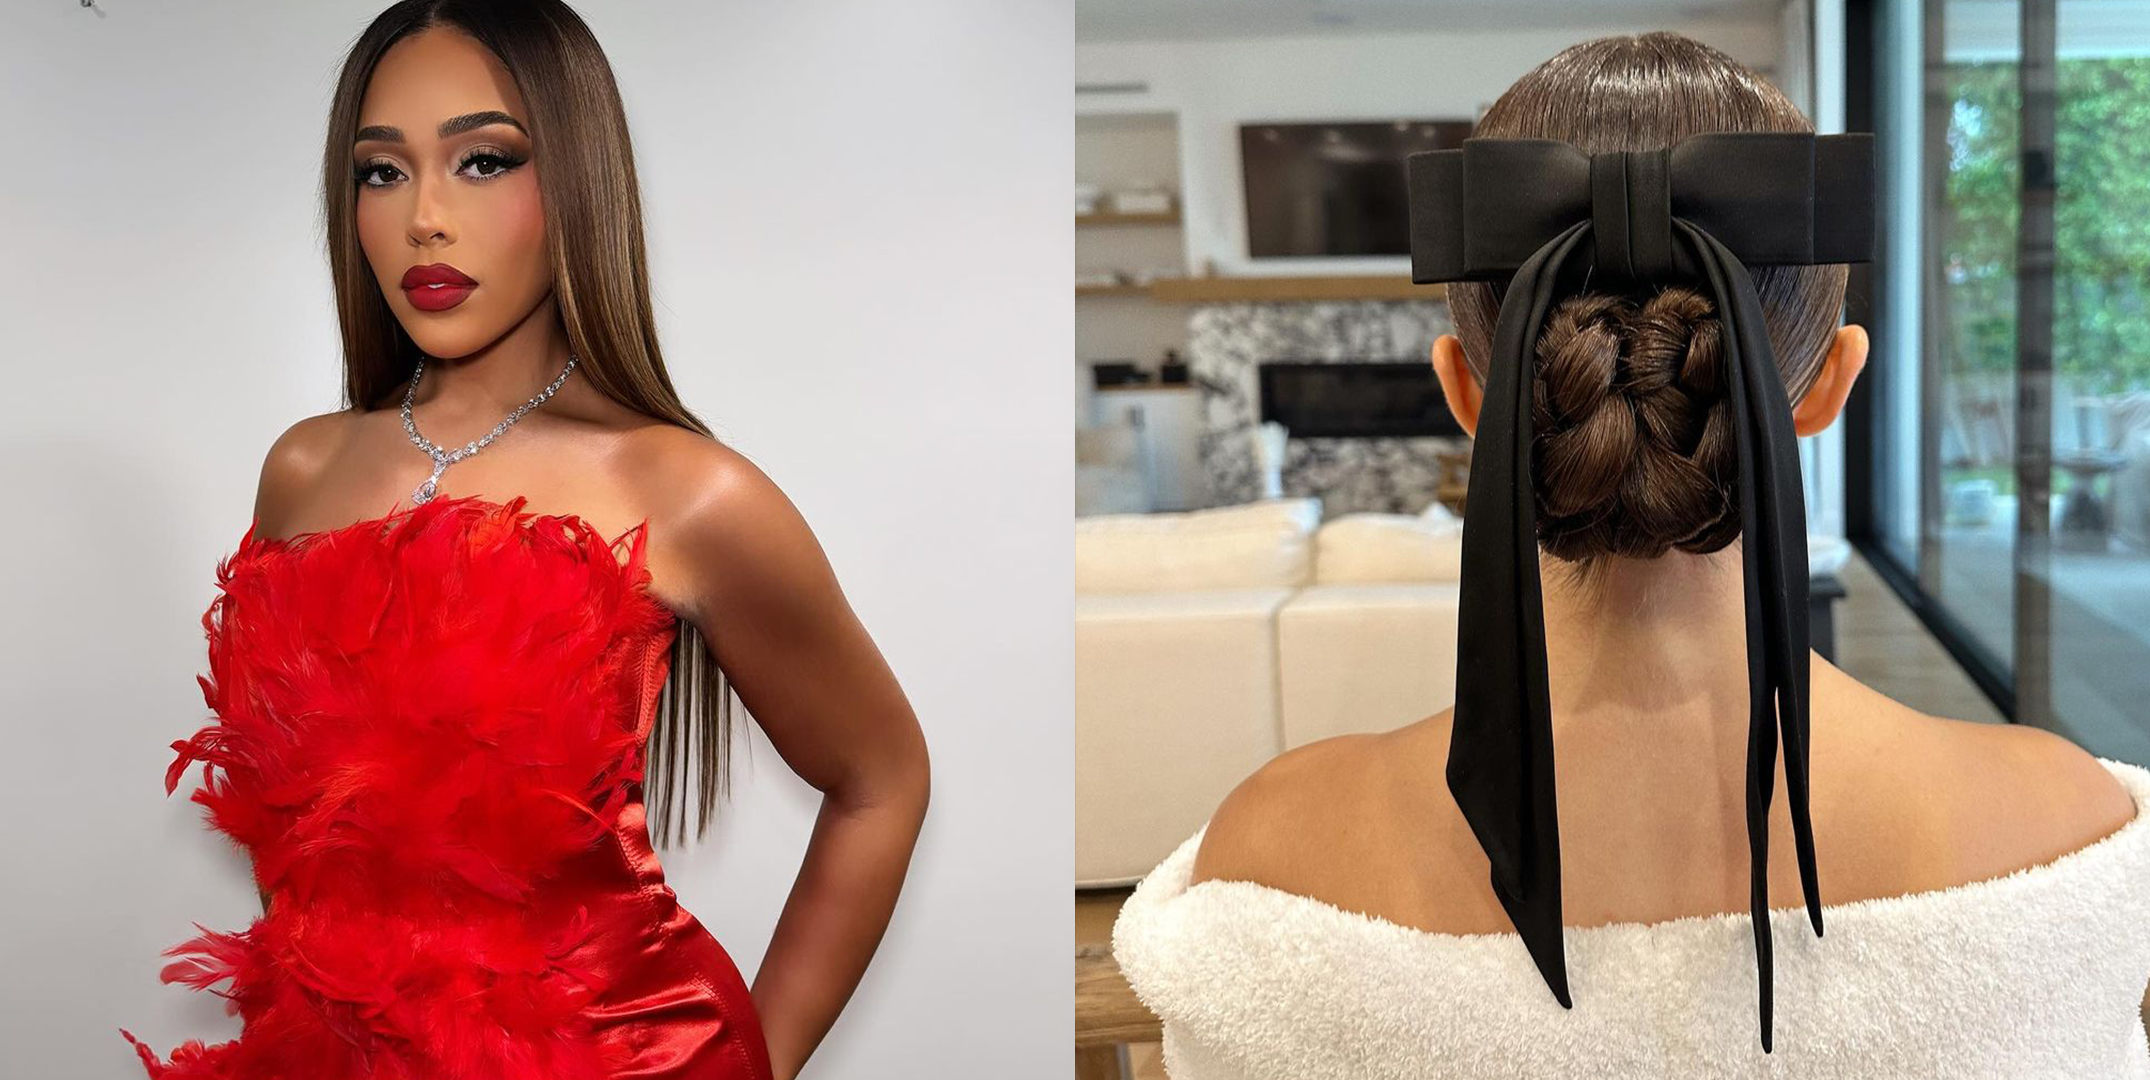 Perfect Hairstyles for your Prom Look - Formal Approach